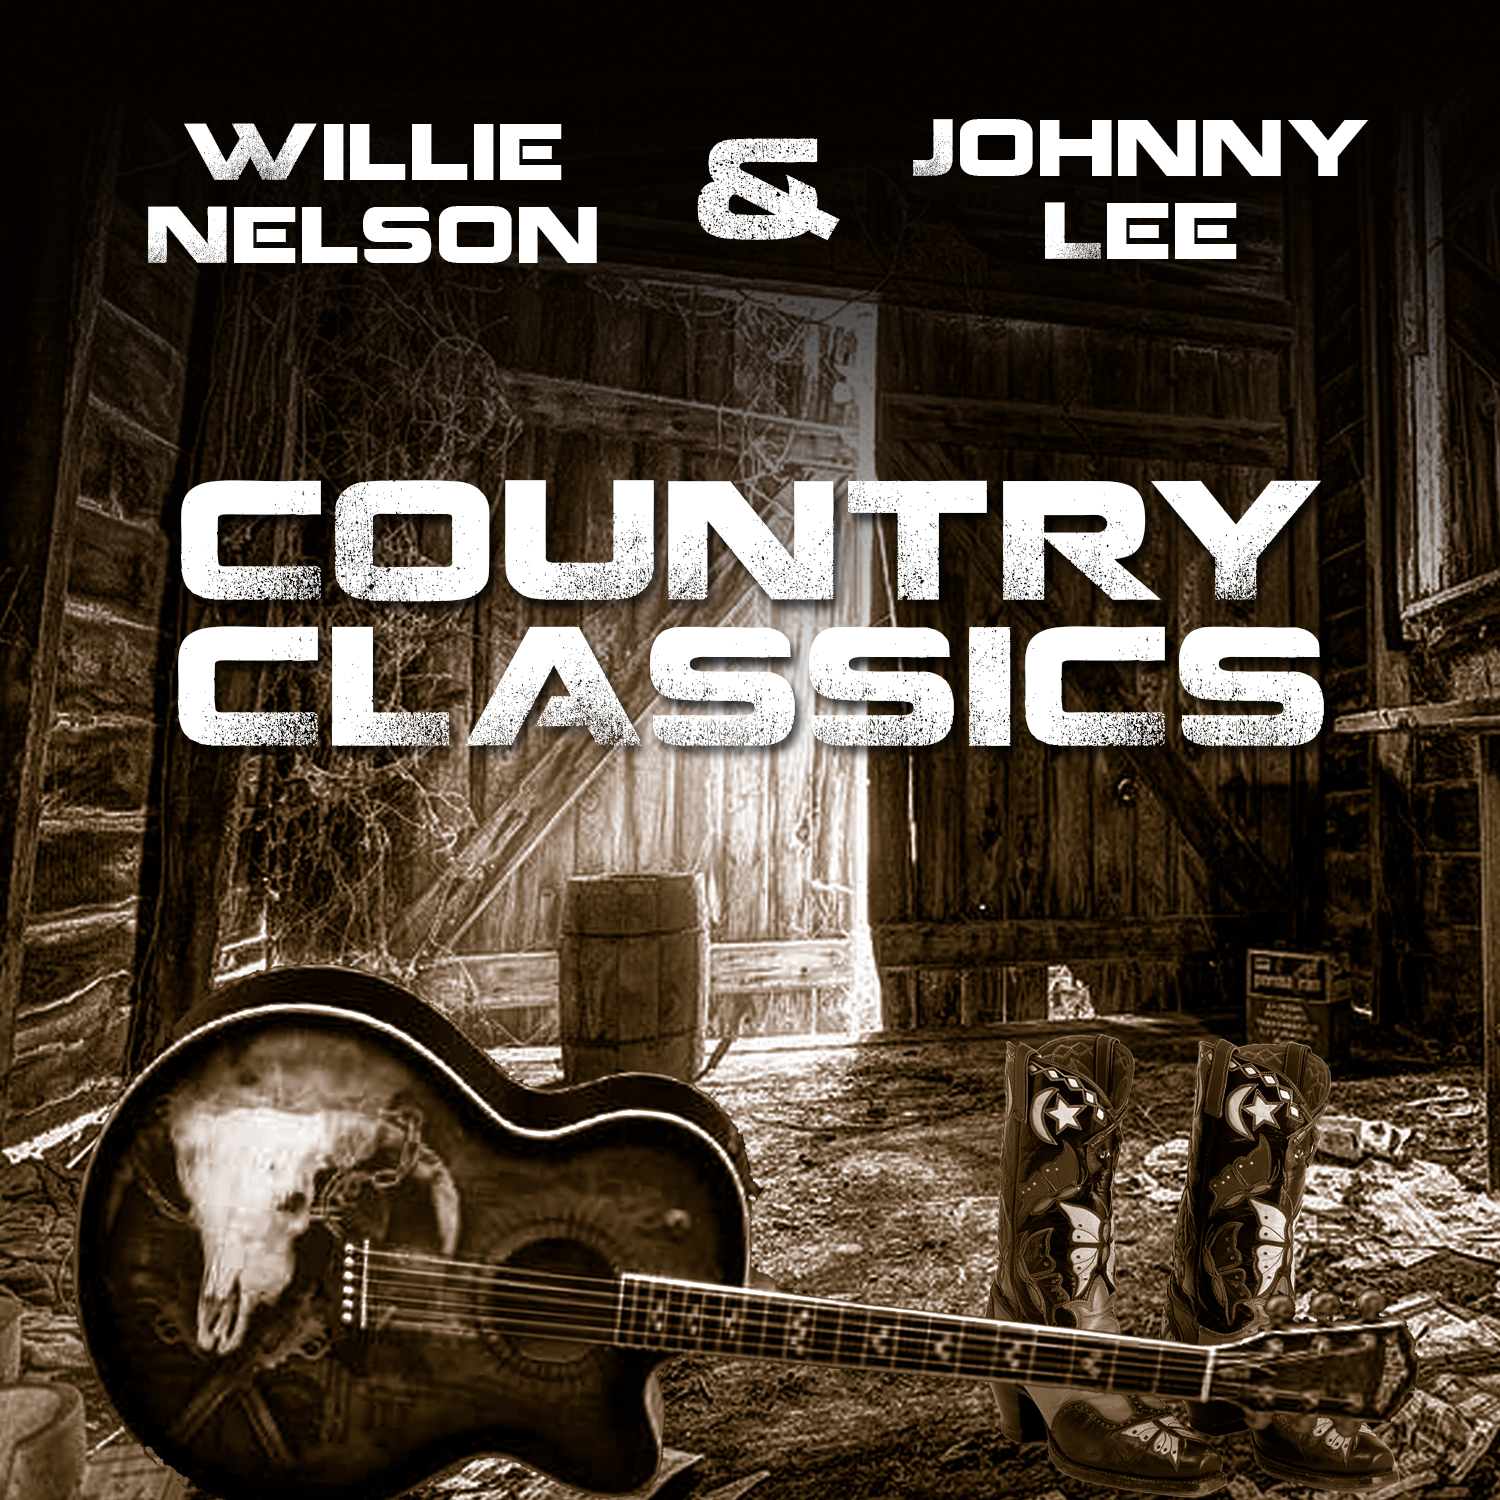 Willie Nelson & Johnny Lee - Country Classics by Johnny Lee